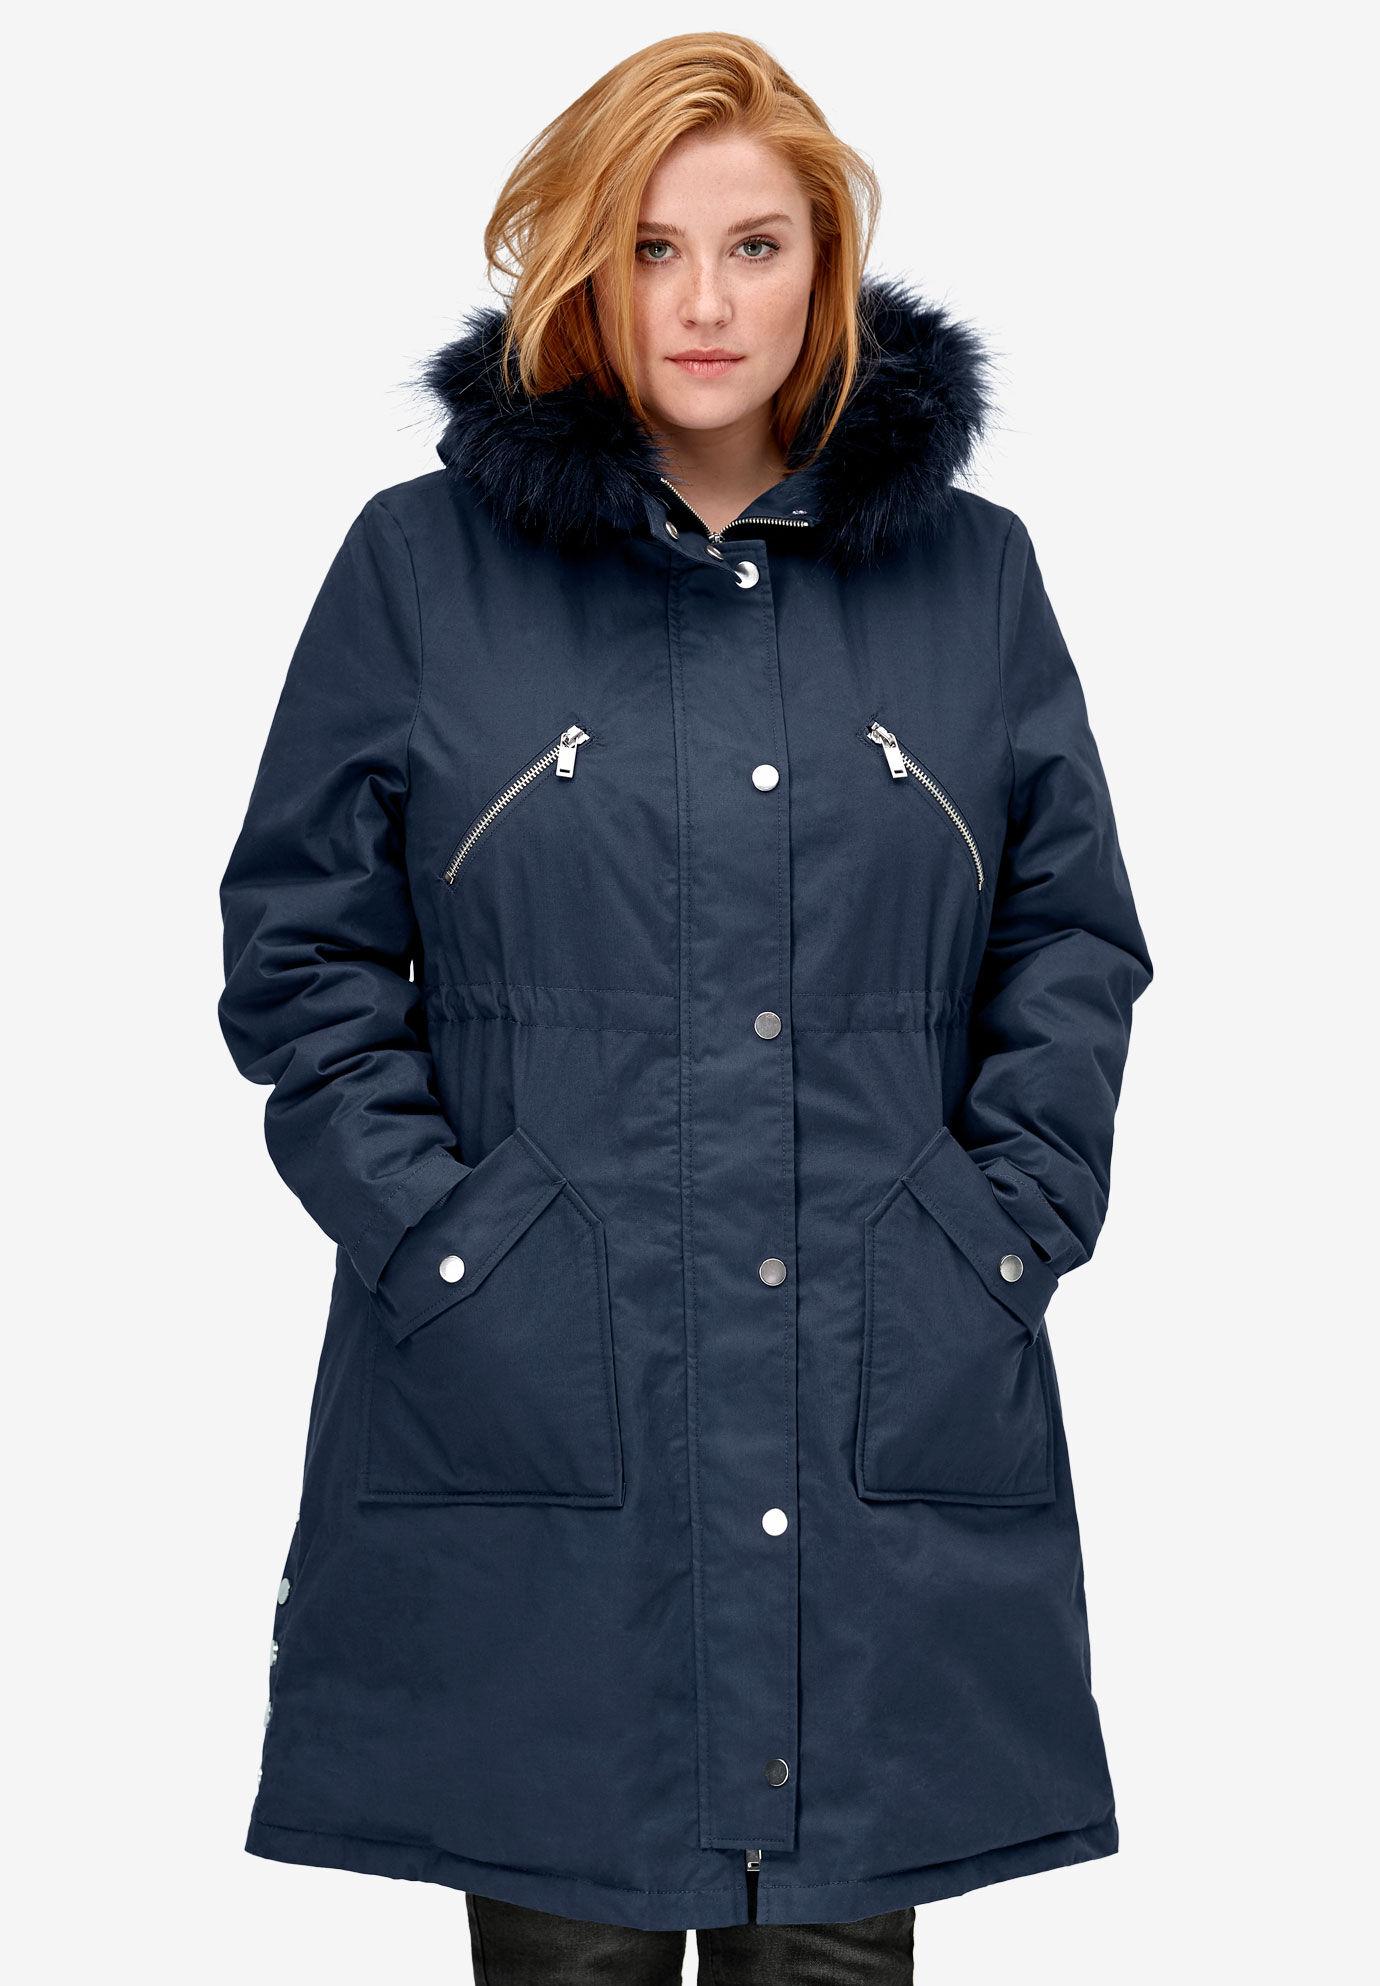 side-snap zip-front parka – Shop The Firesclassics Womens Collection.